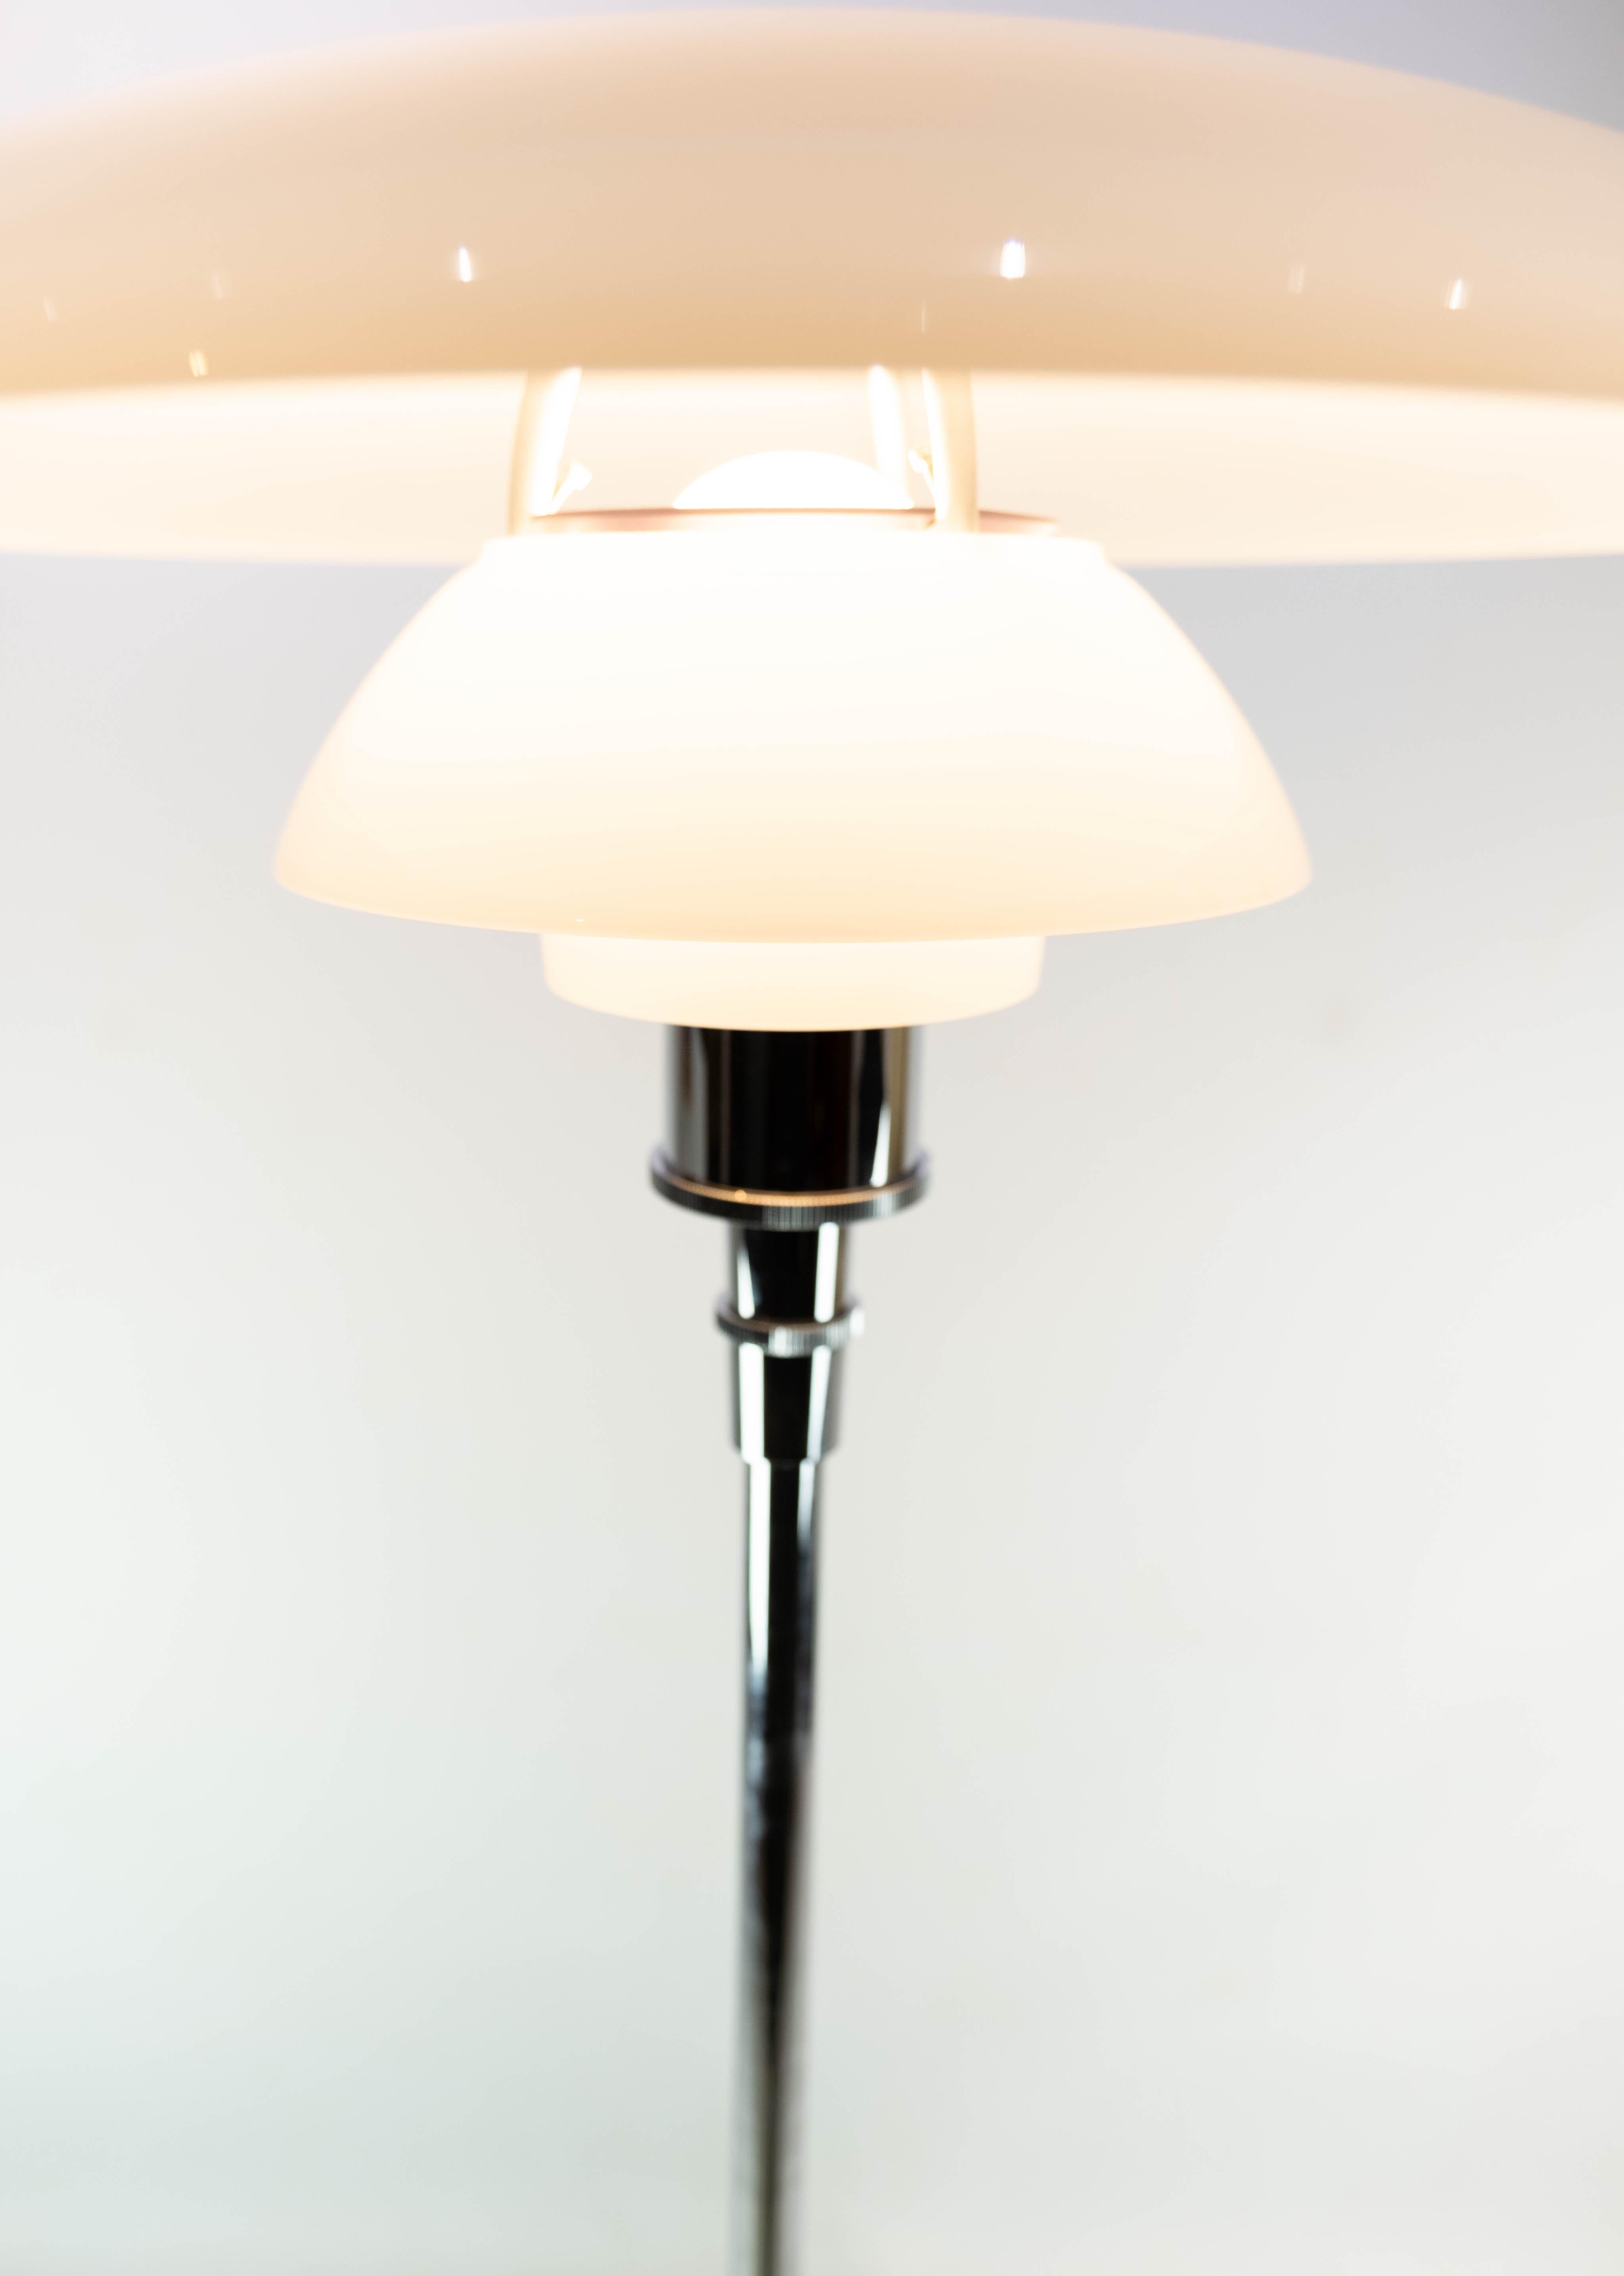 Mid-20th Century Ph 4 1/2-3 1/2 Floor Lamp of Chrome with Shades of Opaline Glass For Sale